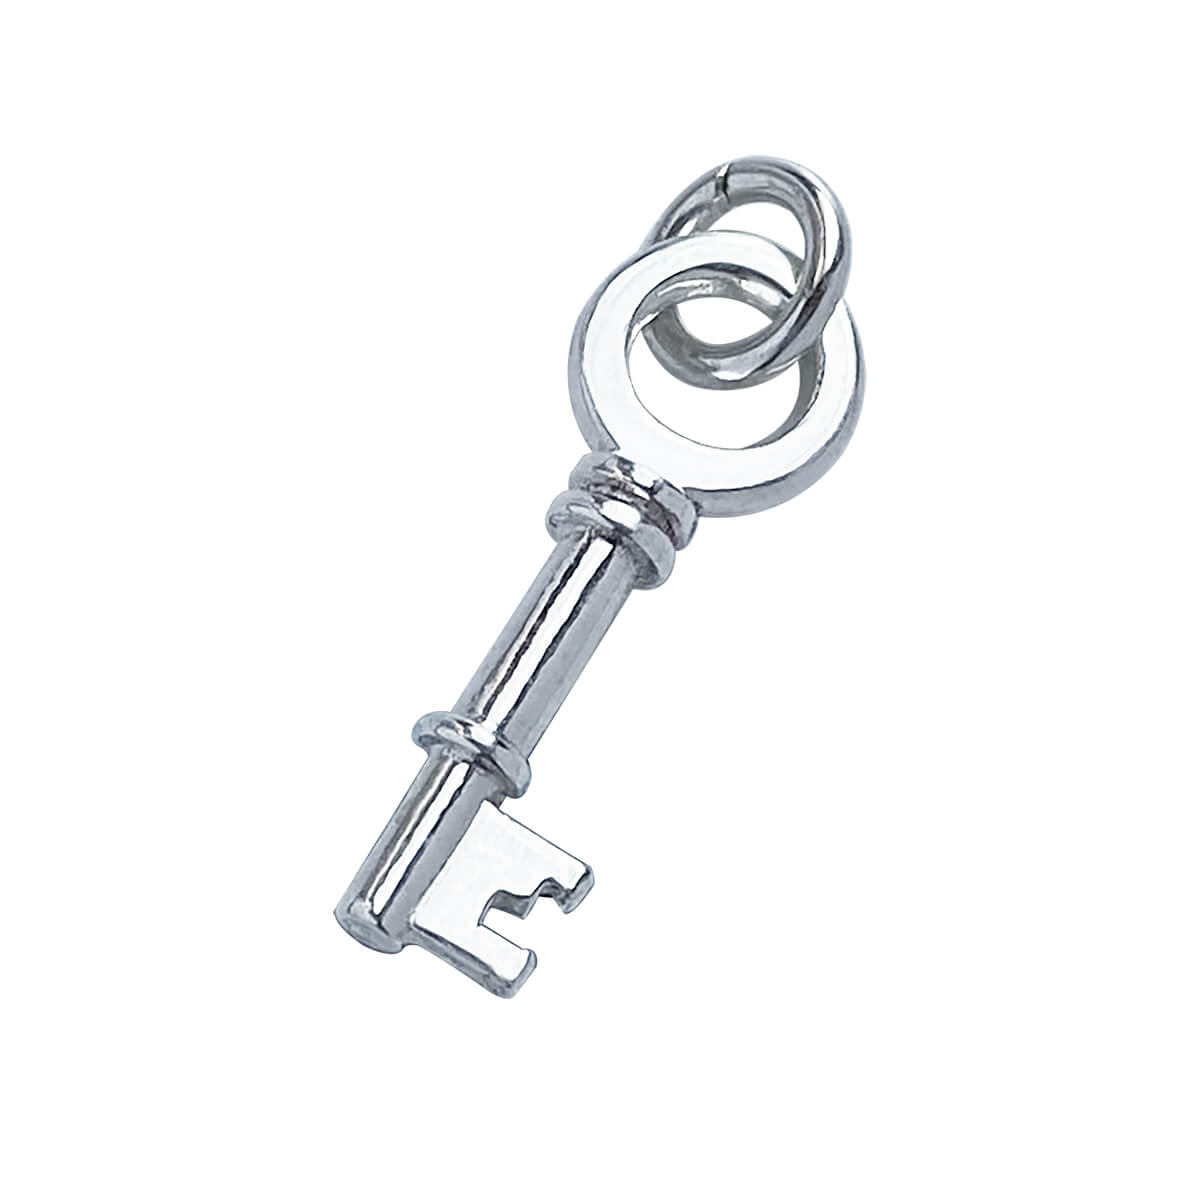 Sterling silver 3 dimensional door key charm from Charmarama Charms